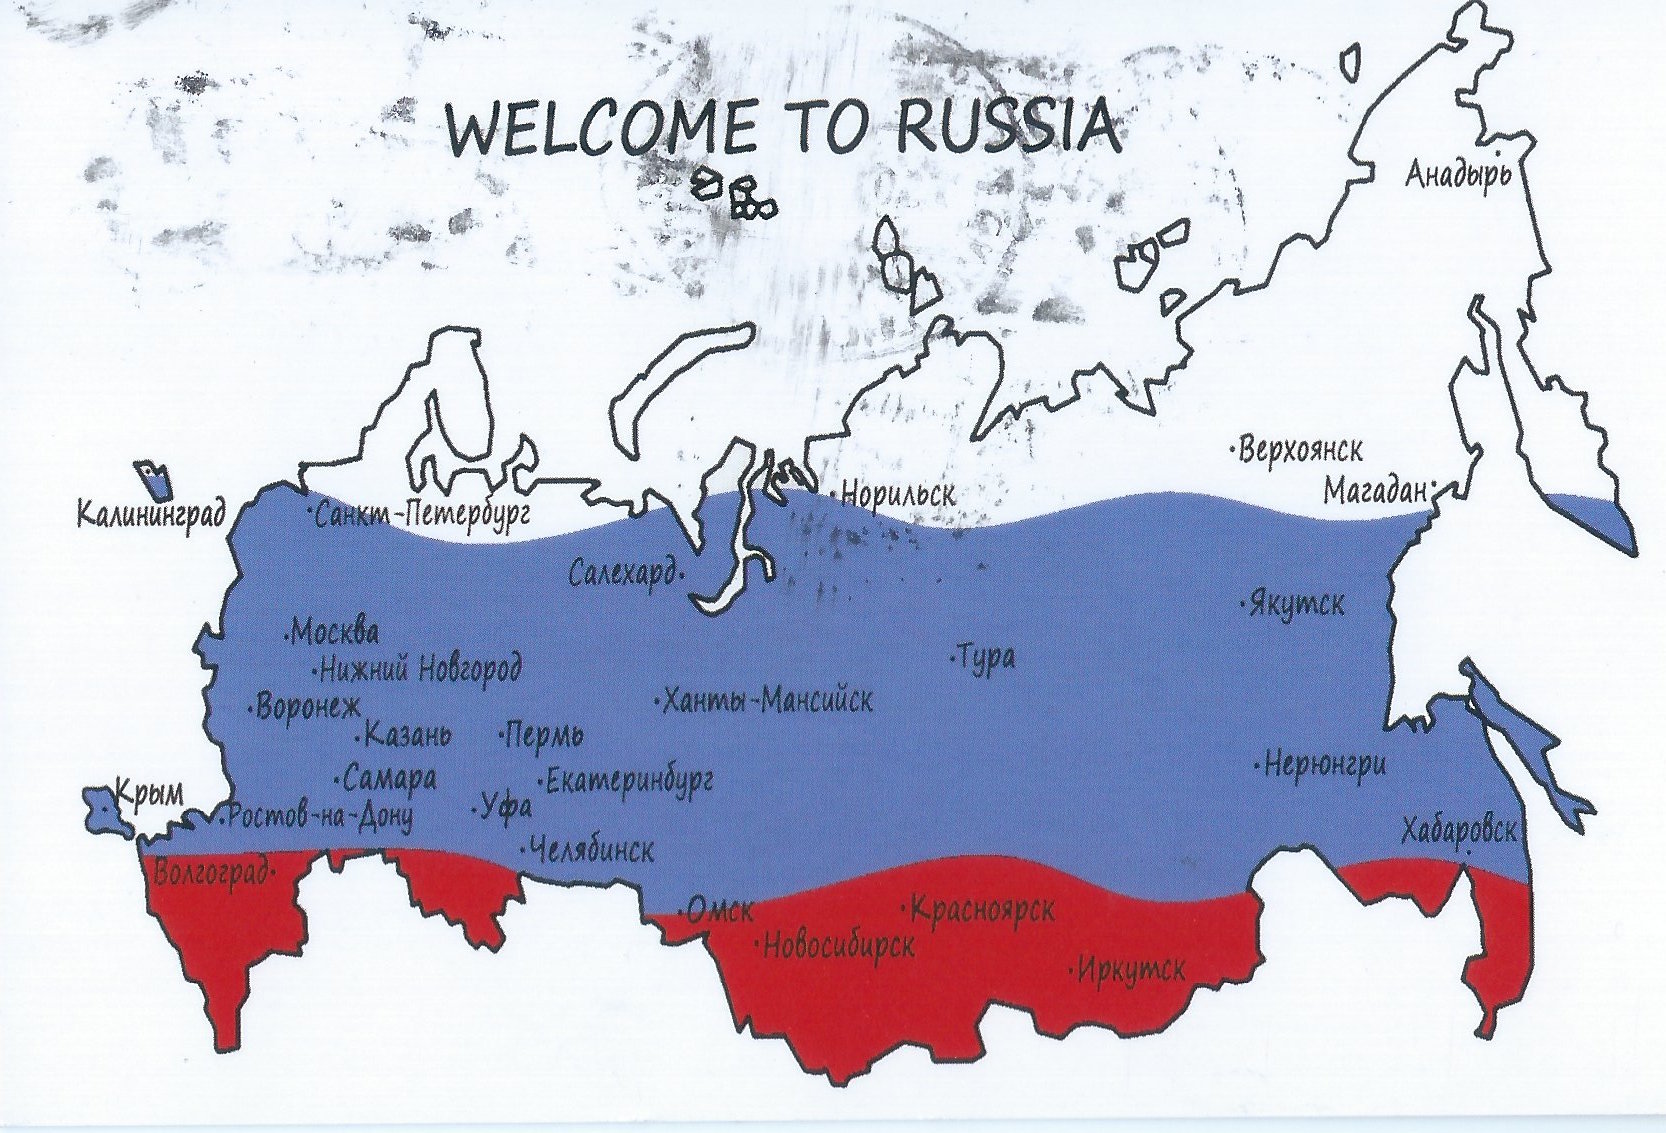 They live in russia. Welcome to Russia. Welcome to Russia картинки. Плакат на тему Welcome to Russia. Россия Welcome.